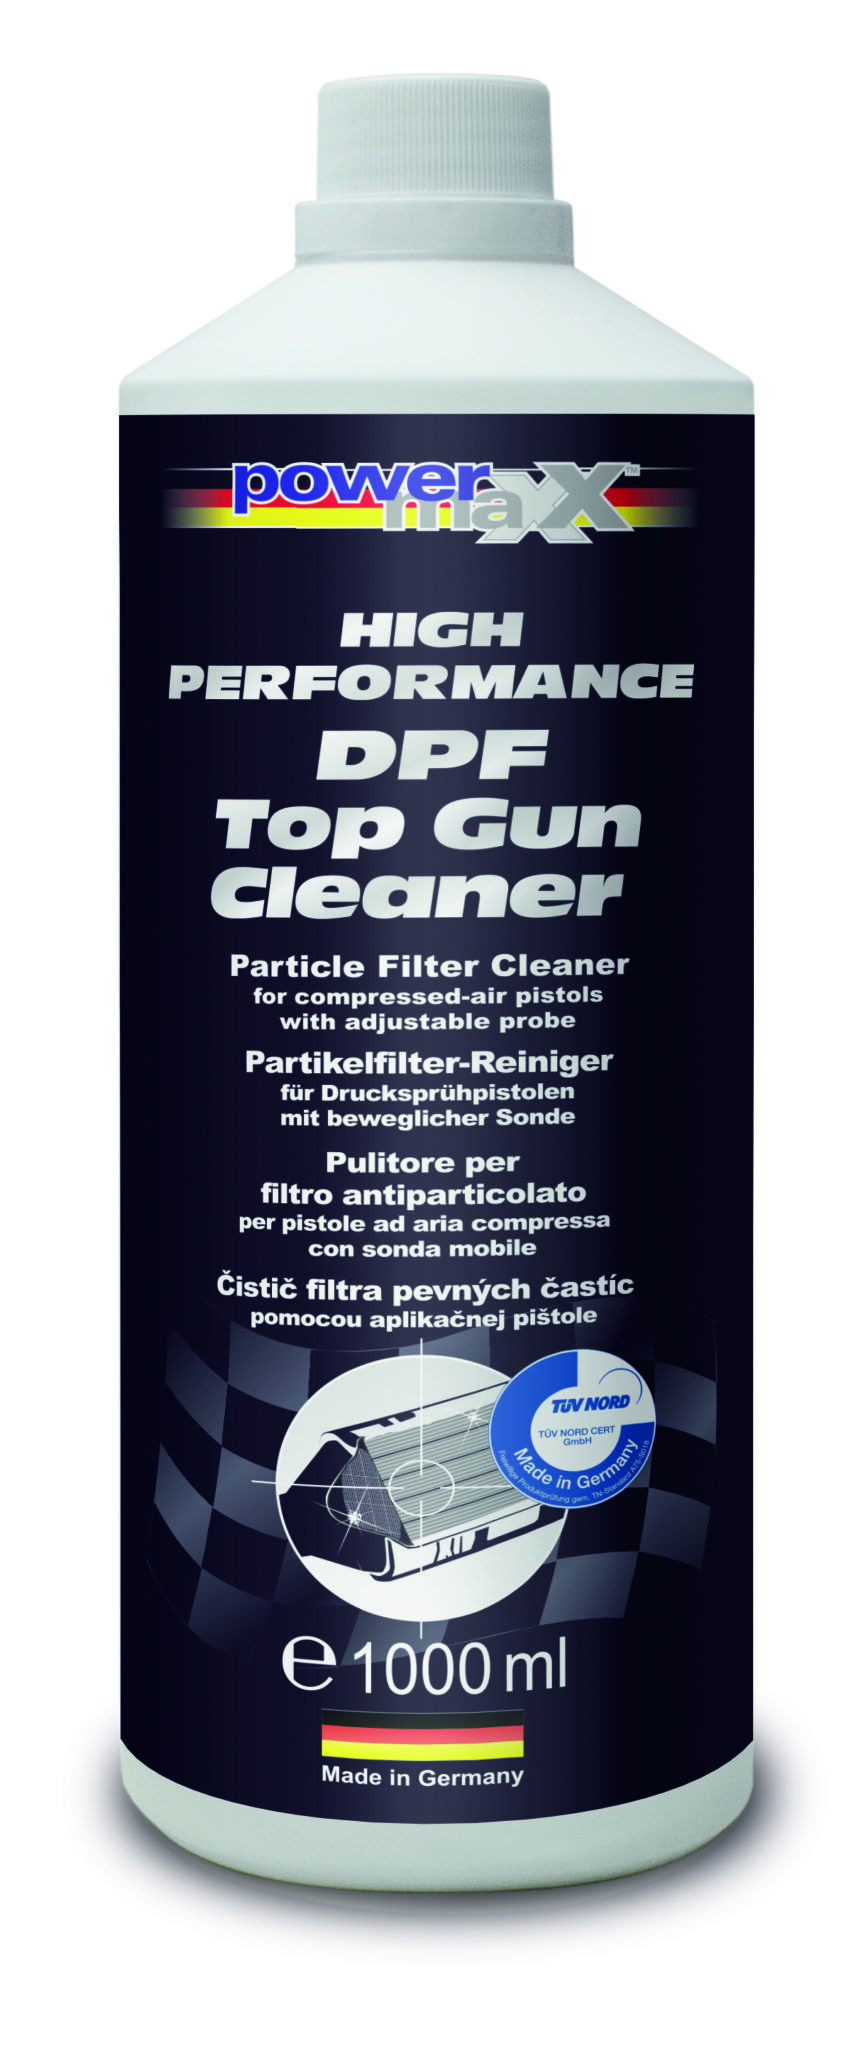 https://www.bluechemgroup.com/wp-content/uploads/2021/12/DPF-TGC.BC_DPFTopGunCleaner_1L_PIC_1-scaled.jpg